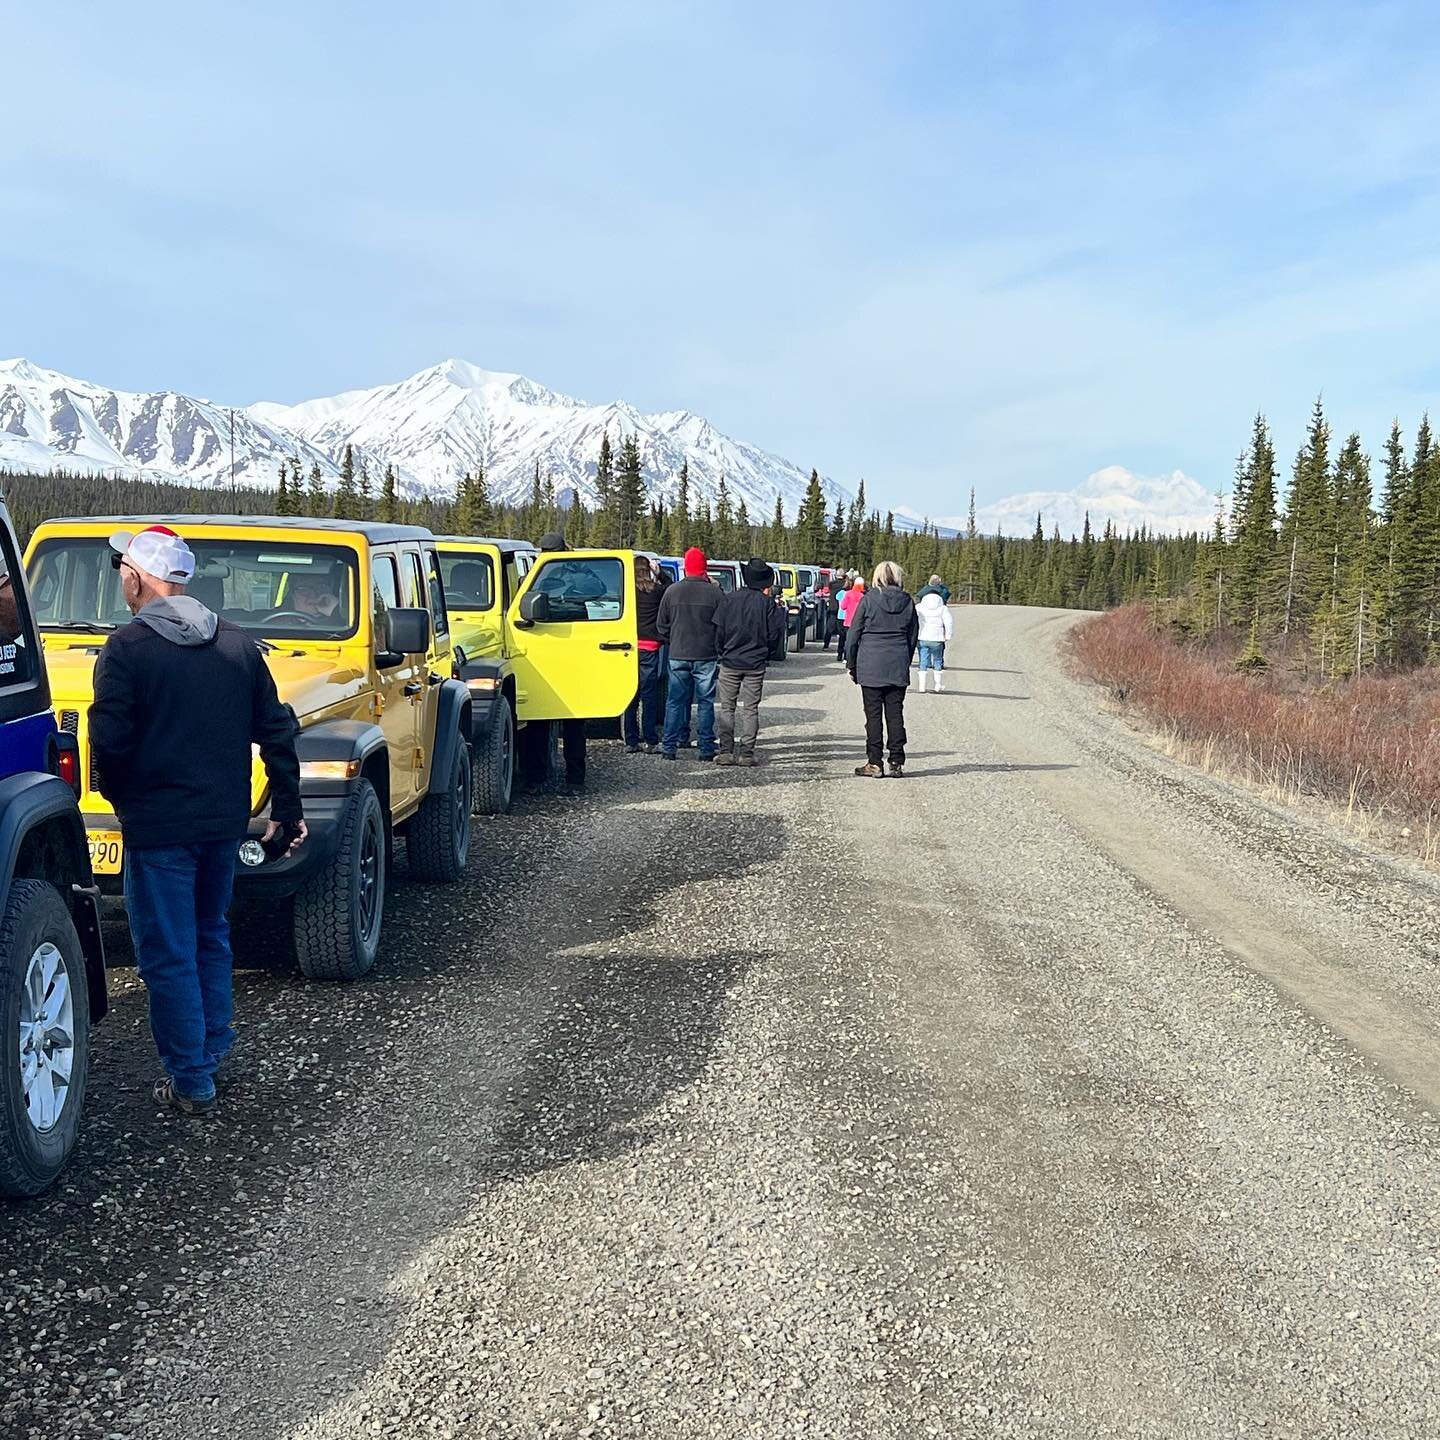 Awesome first day of tours this summer! The sun was shining and Denali was out! ☀️ 🏔️